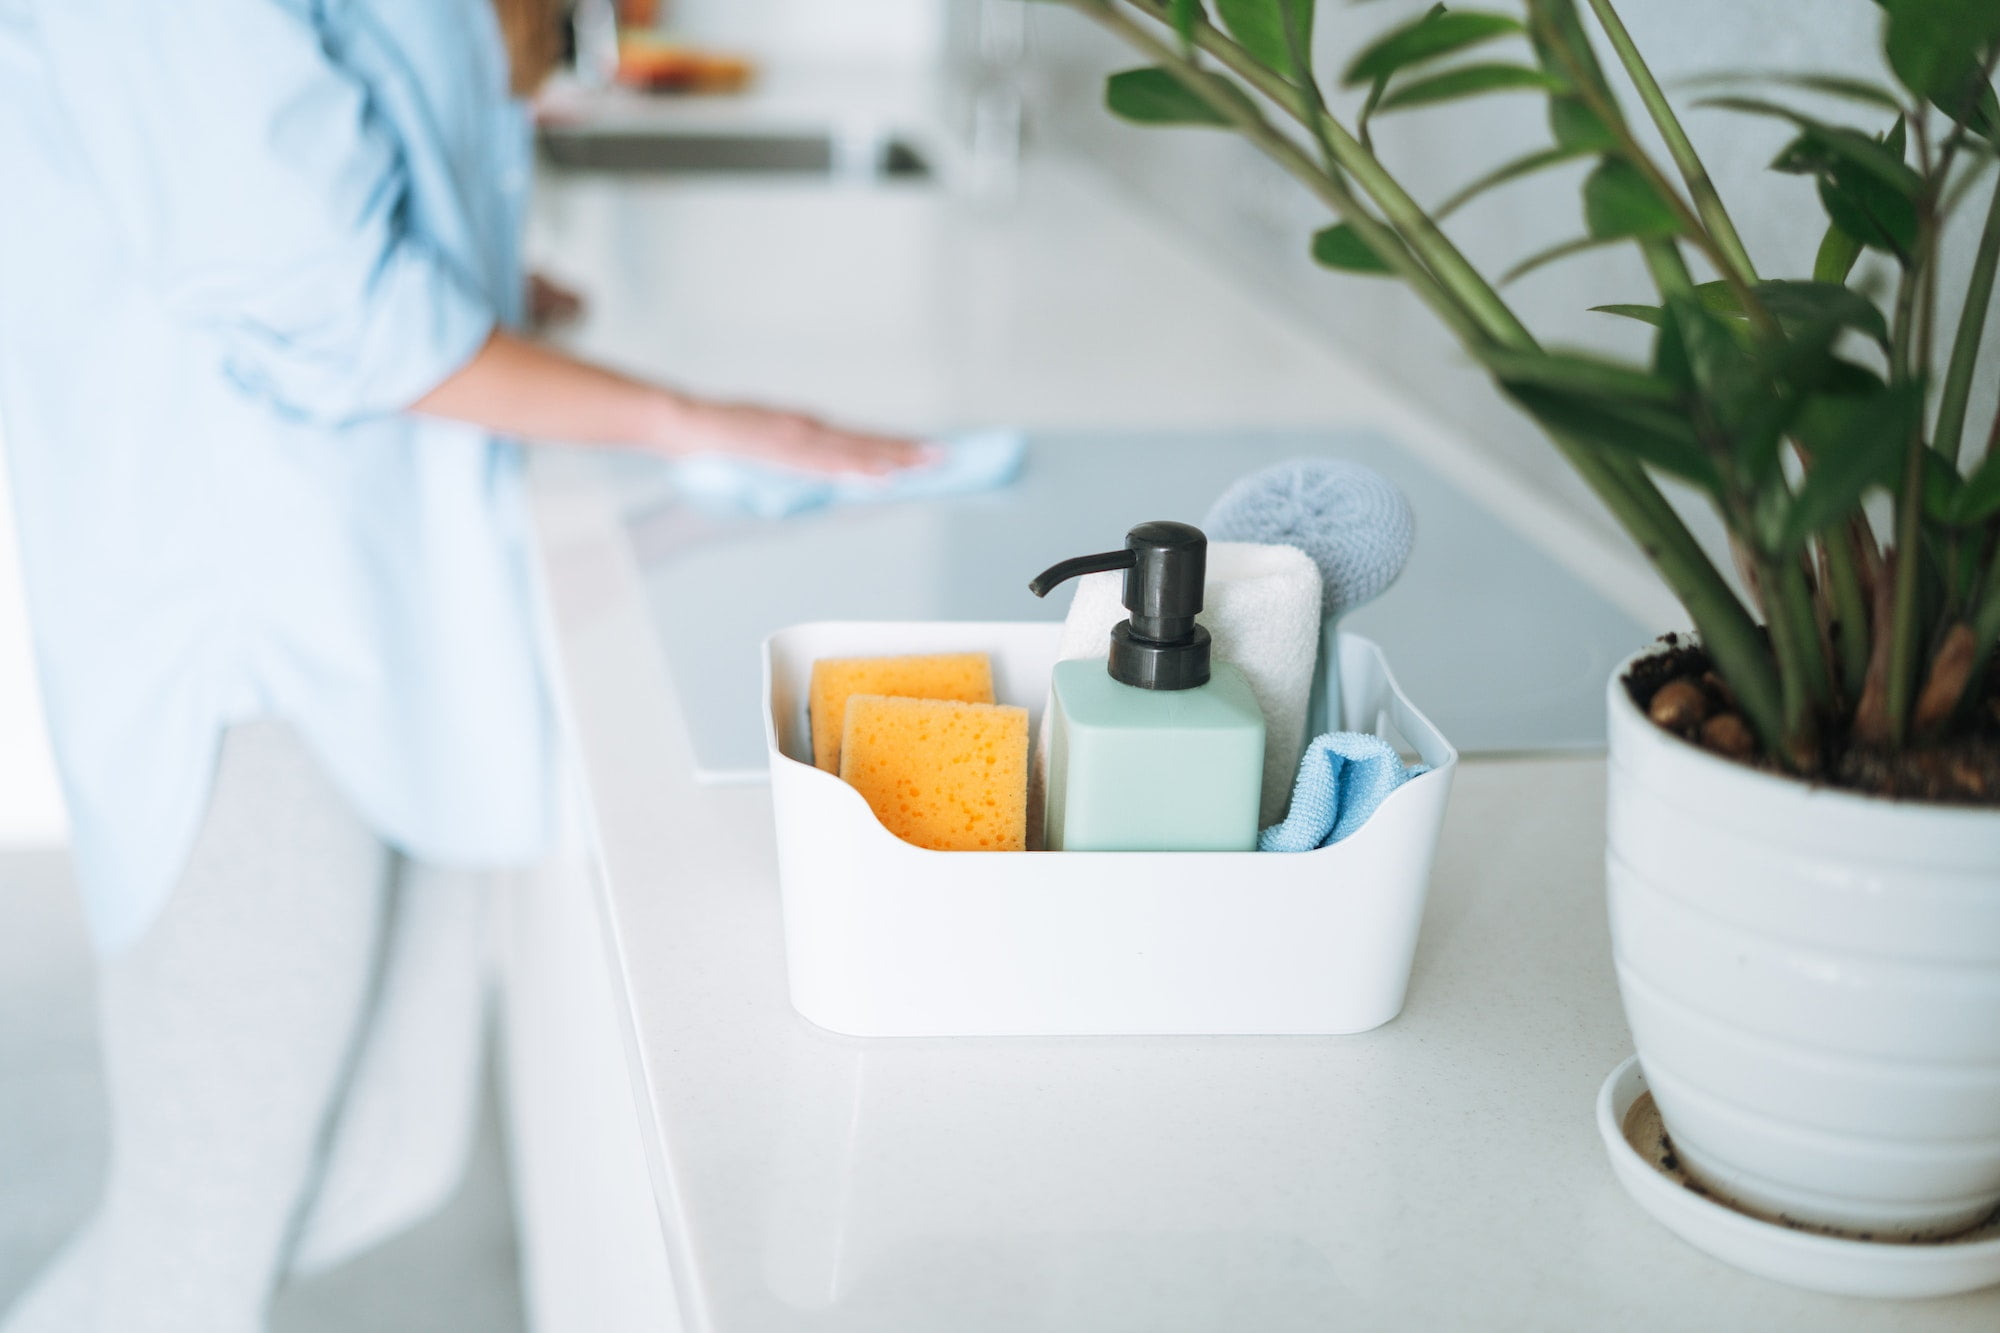 A woman is cleaning a kitchen counter with cleaning supplies.